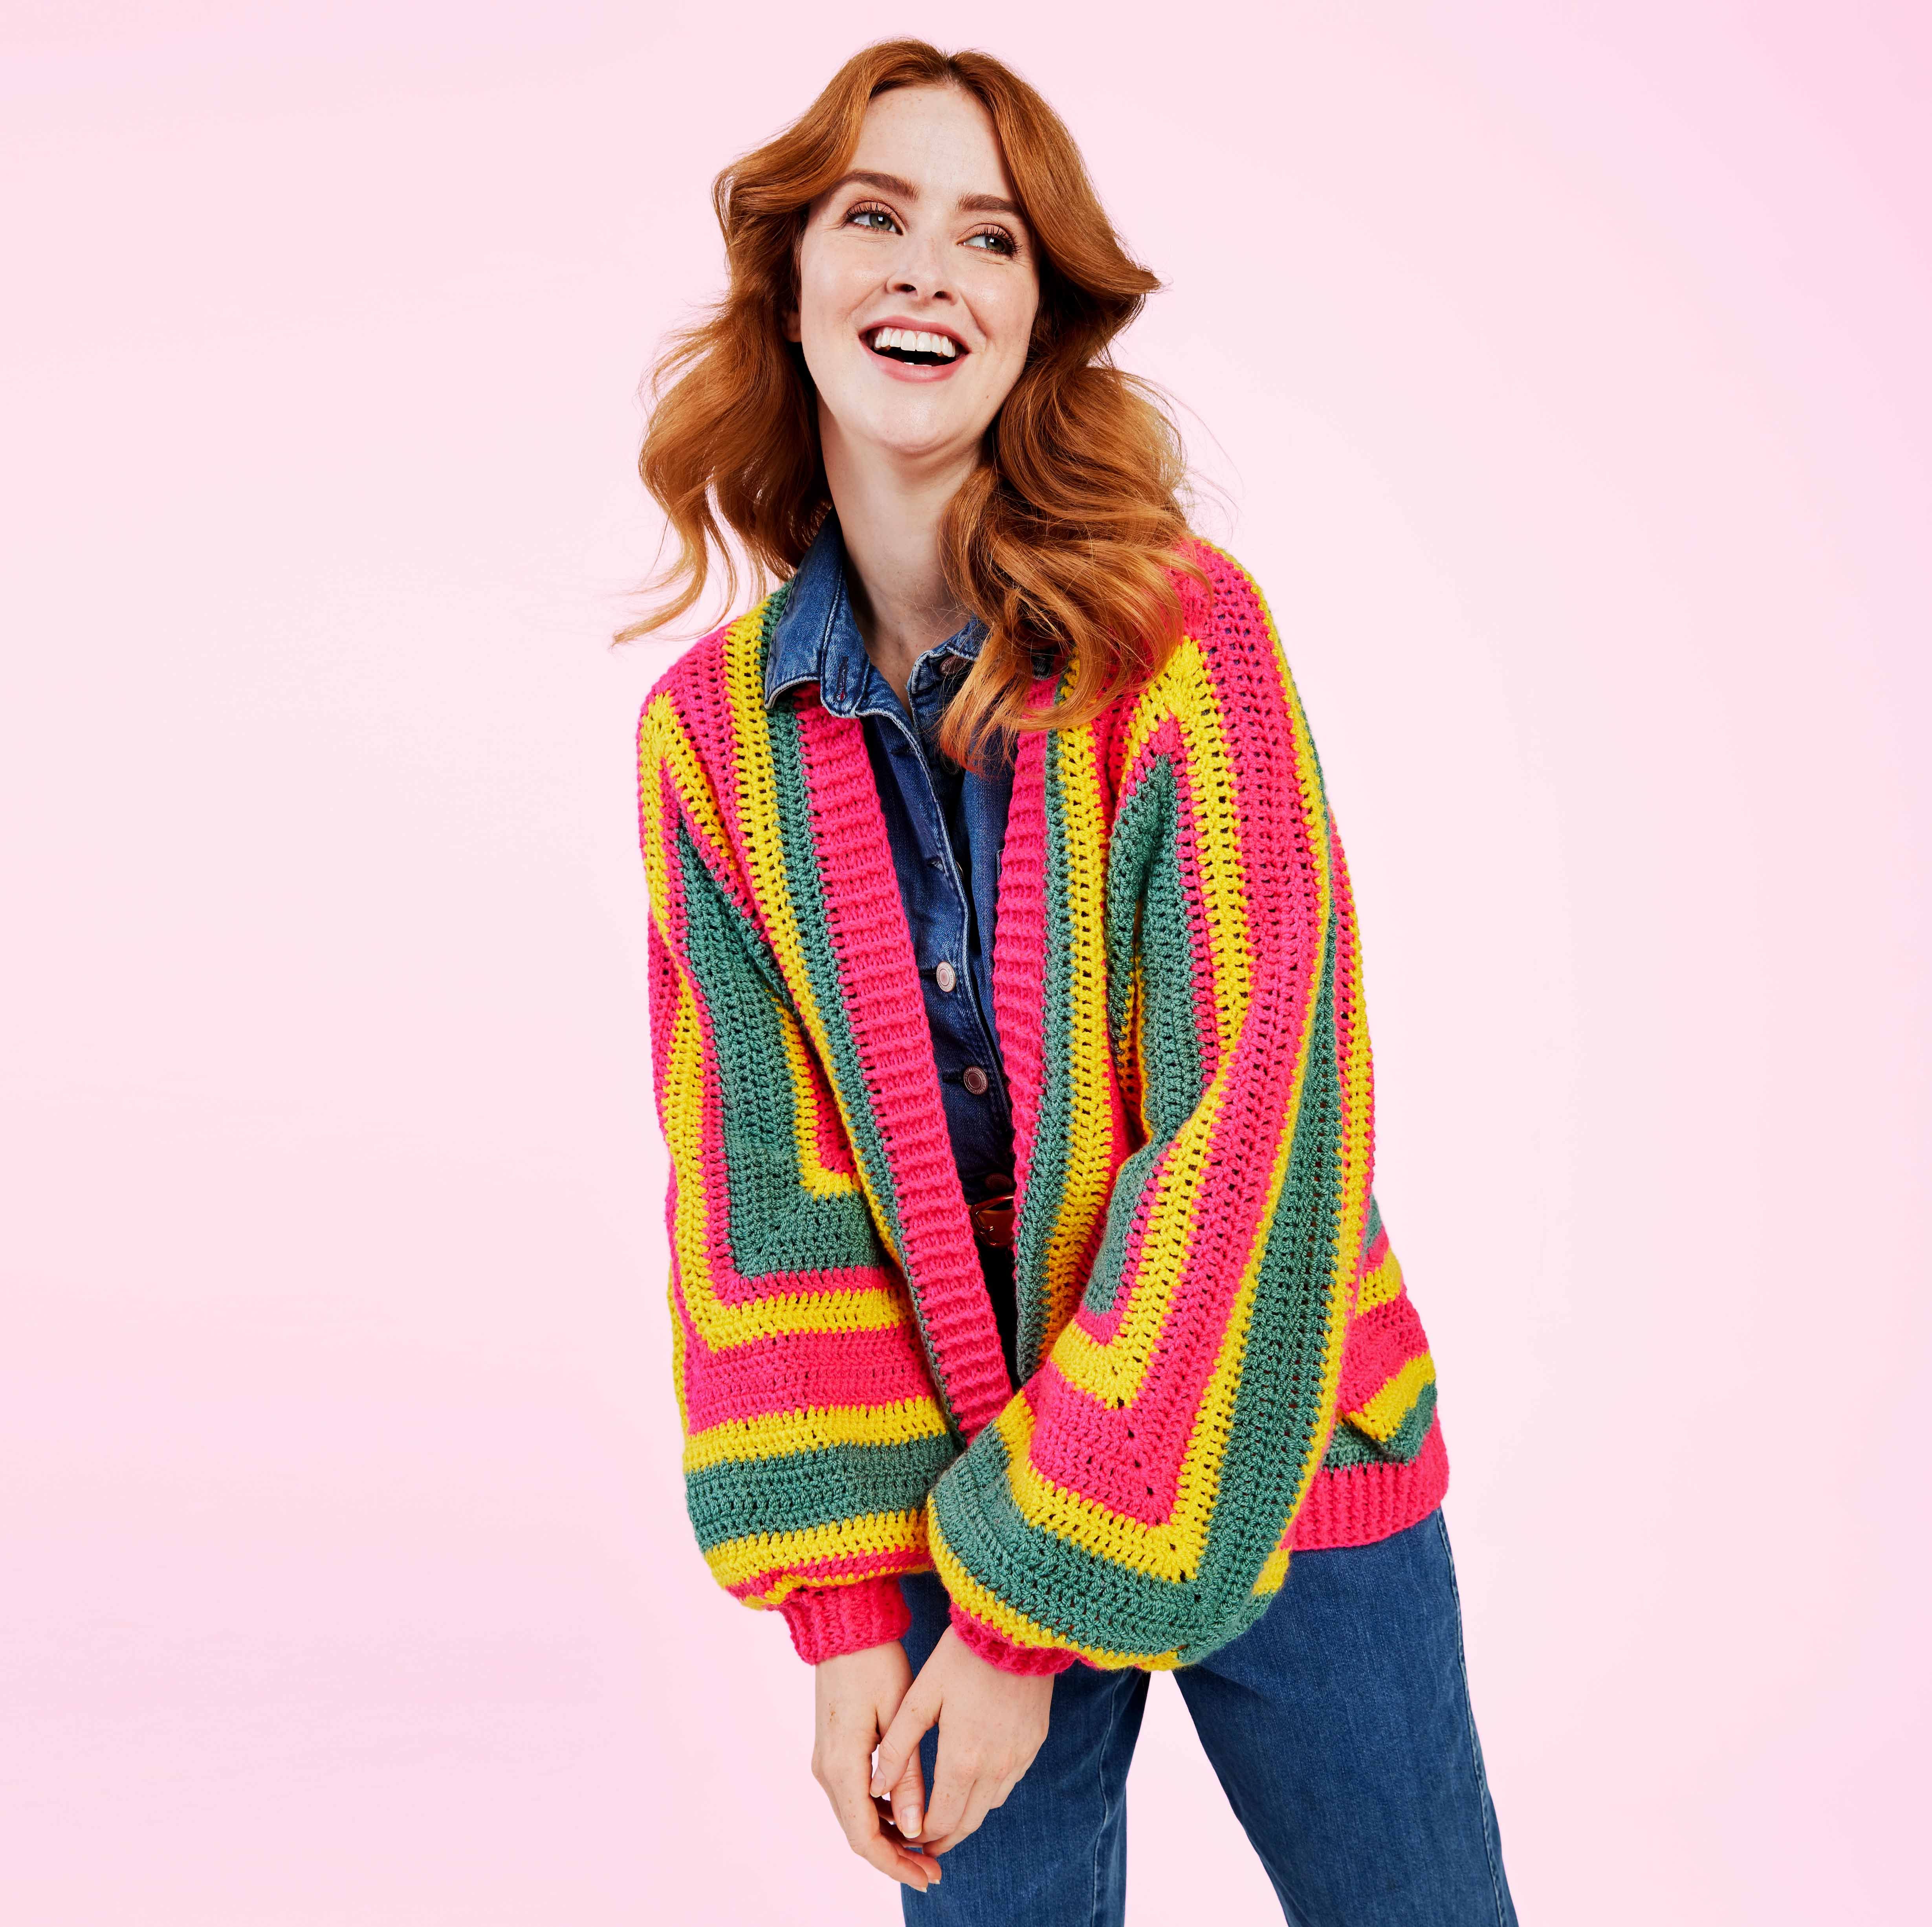 Free crochet pattern to make a colourful cardigan